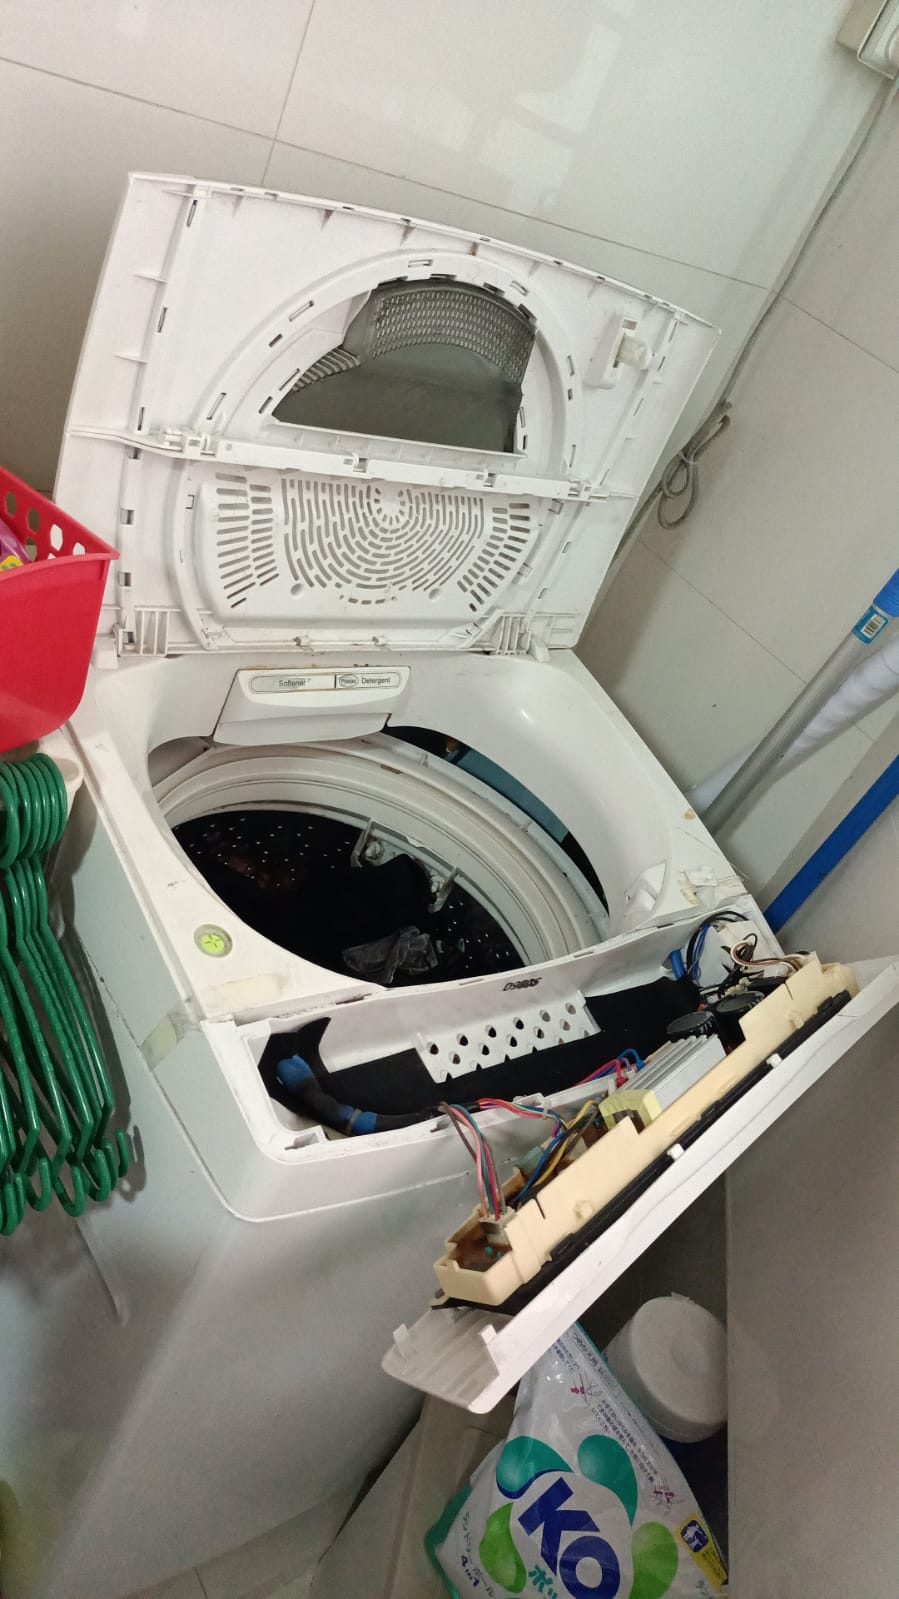 Washing Machine Checking For Control Panel Issue 5